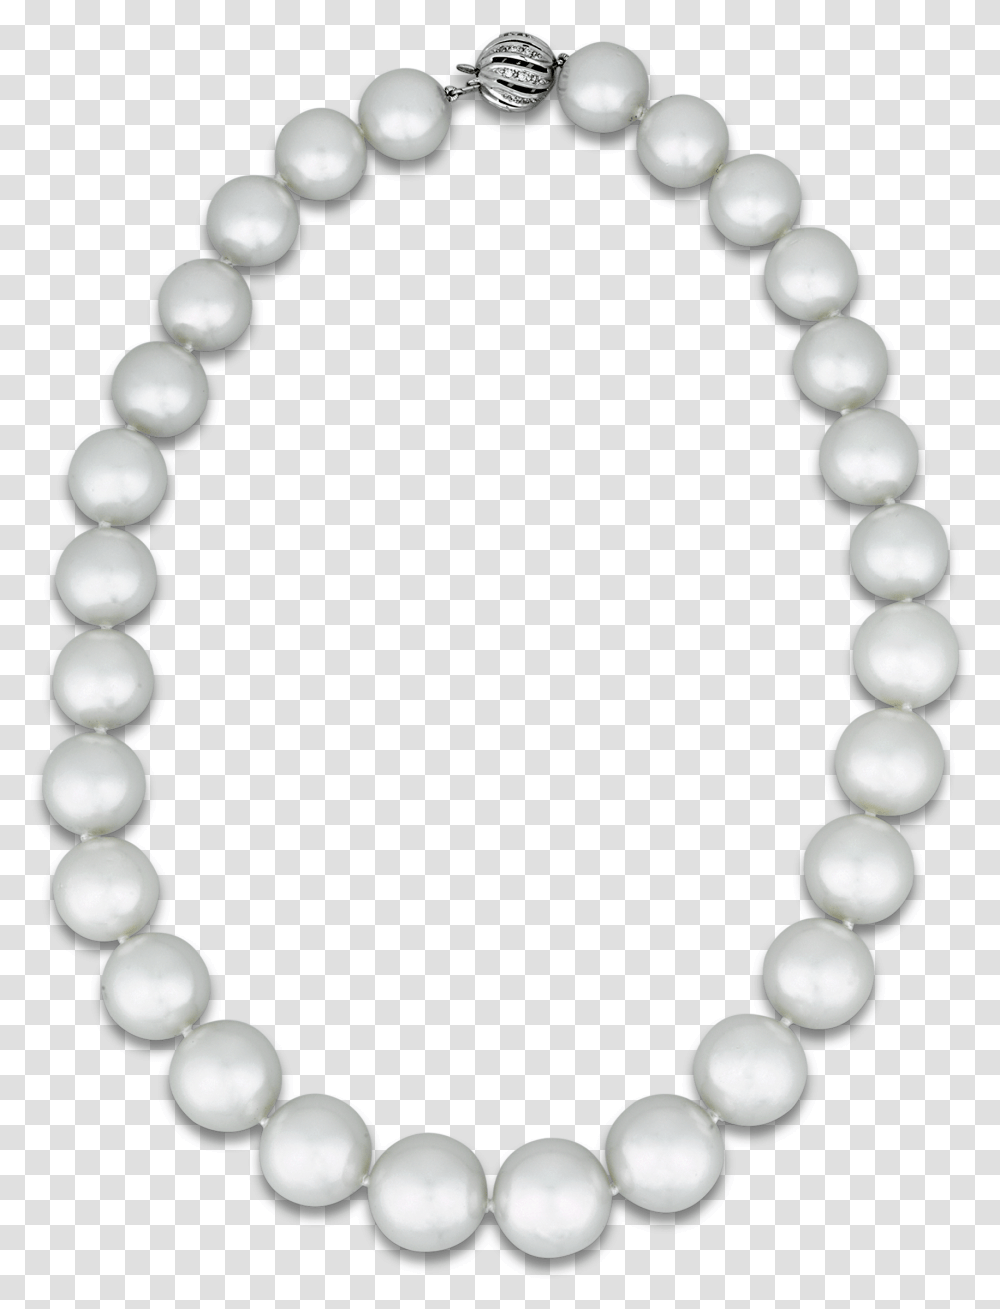 White South Sea Pearl Necklace Disney Princess Frames, Accessories, Accessory, Jewelry, Bead Transparent Png